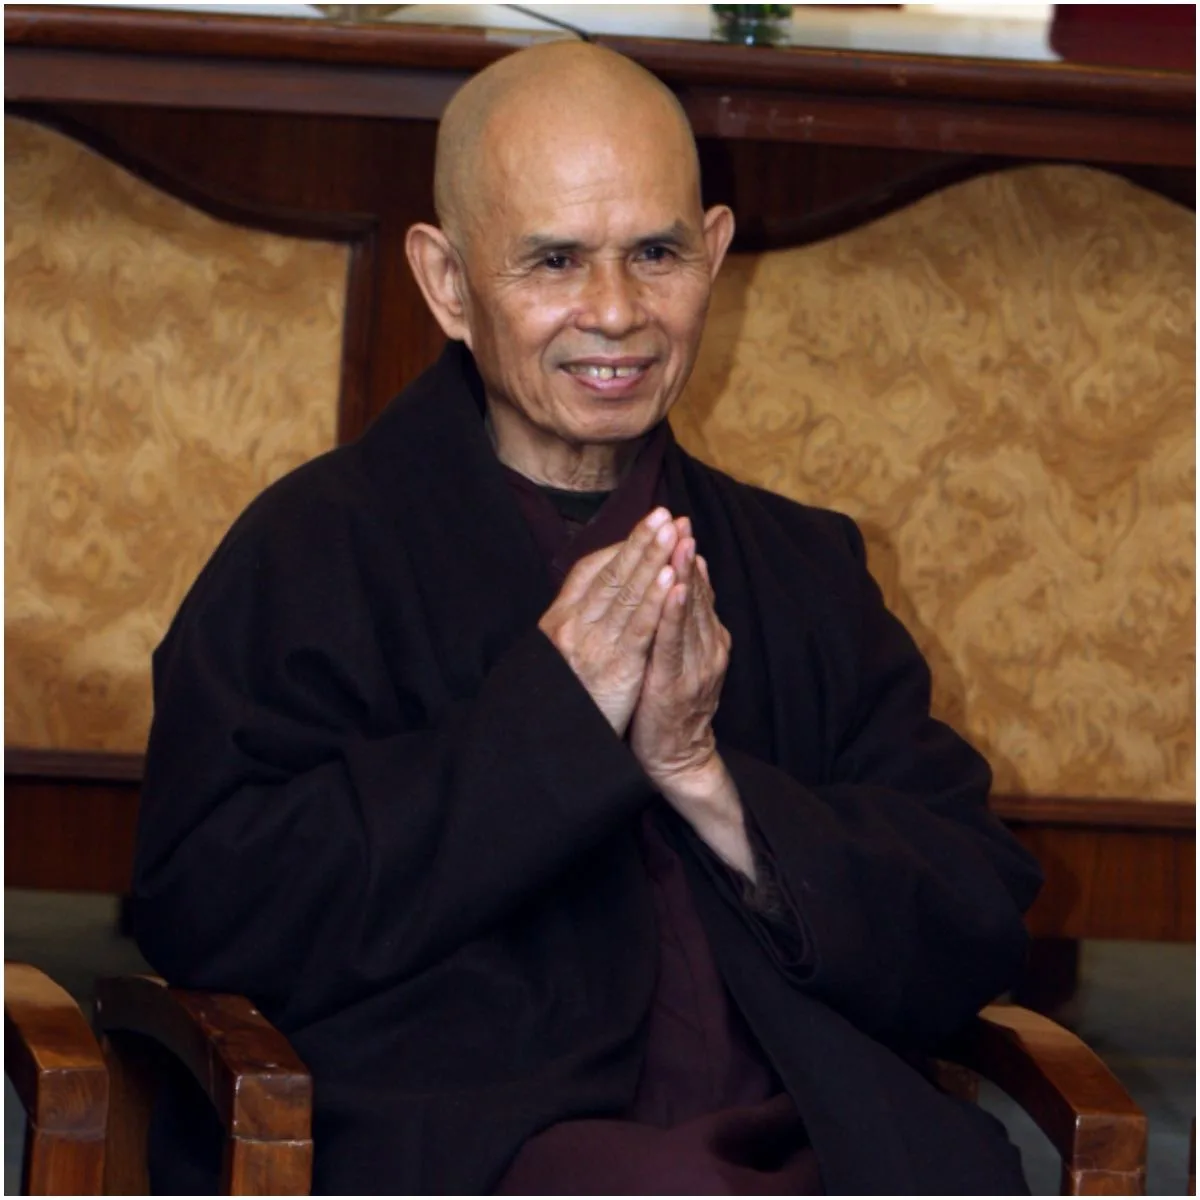 quotes by Thich Nhat Hanh